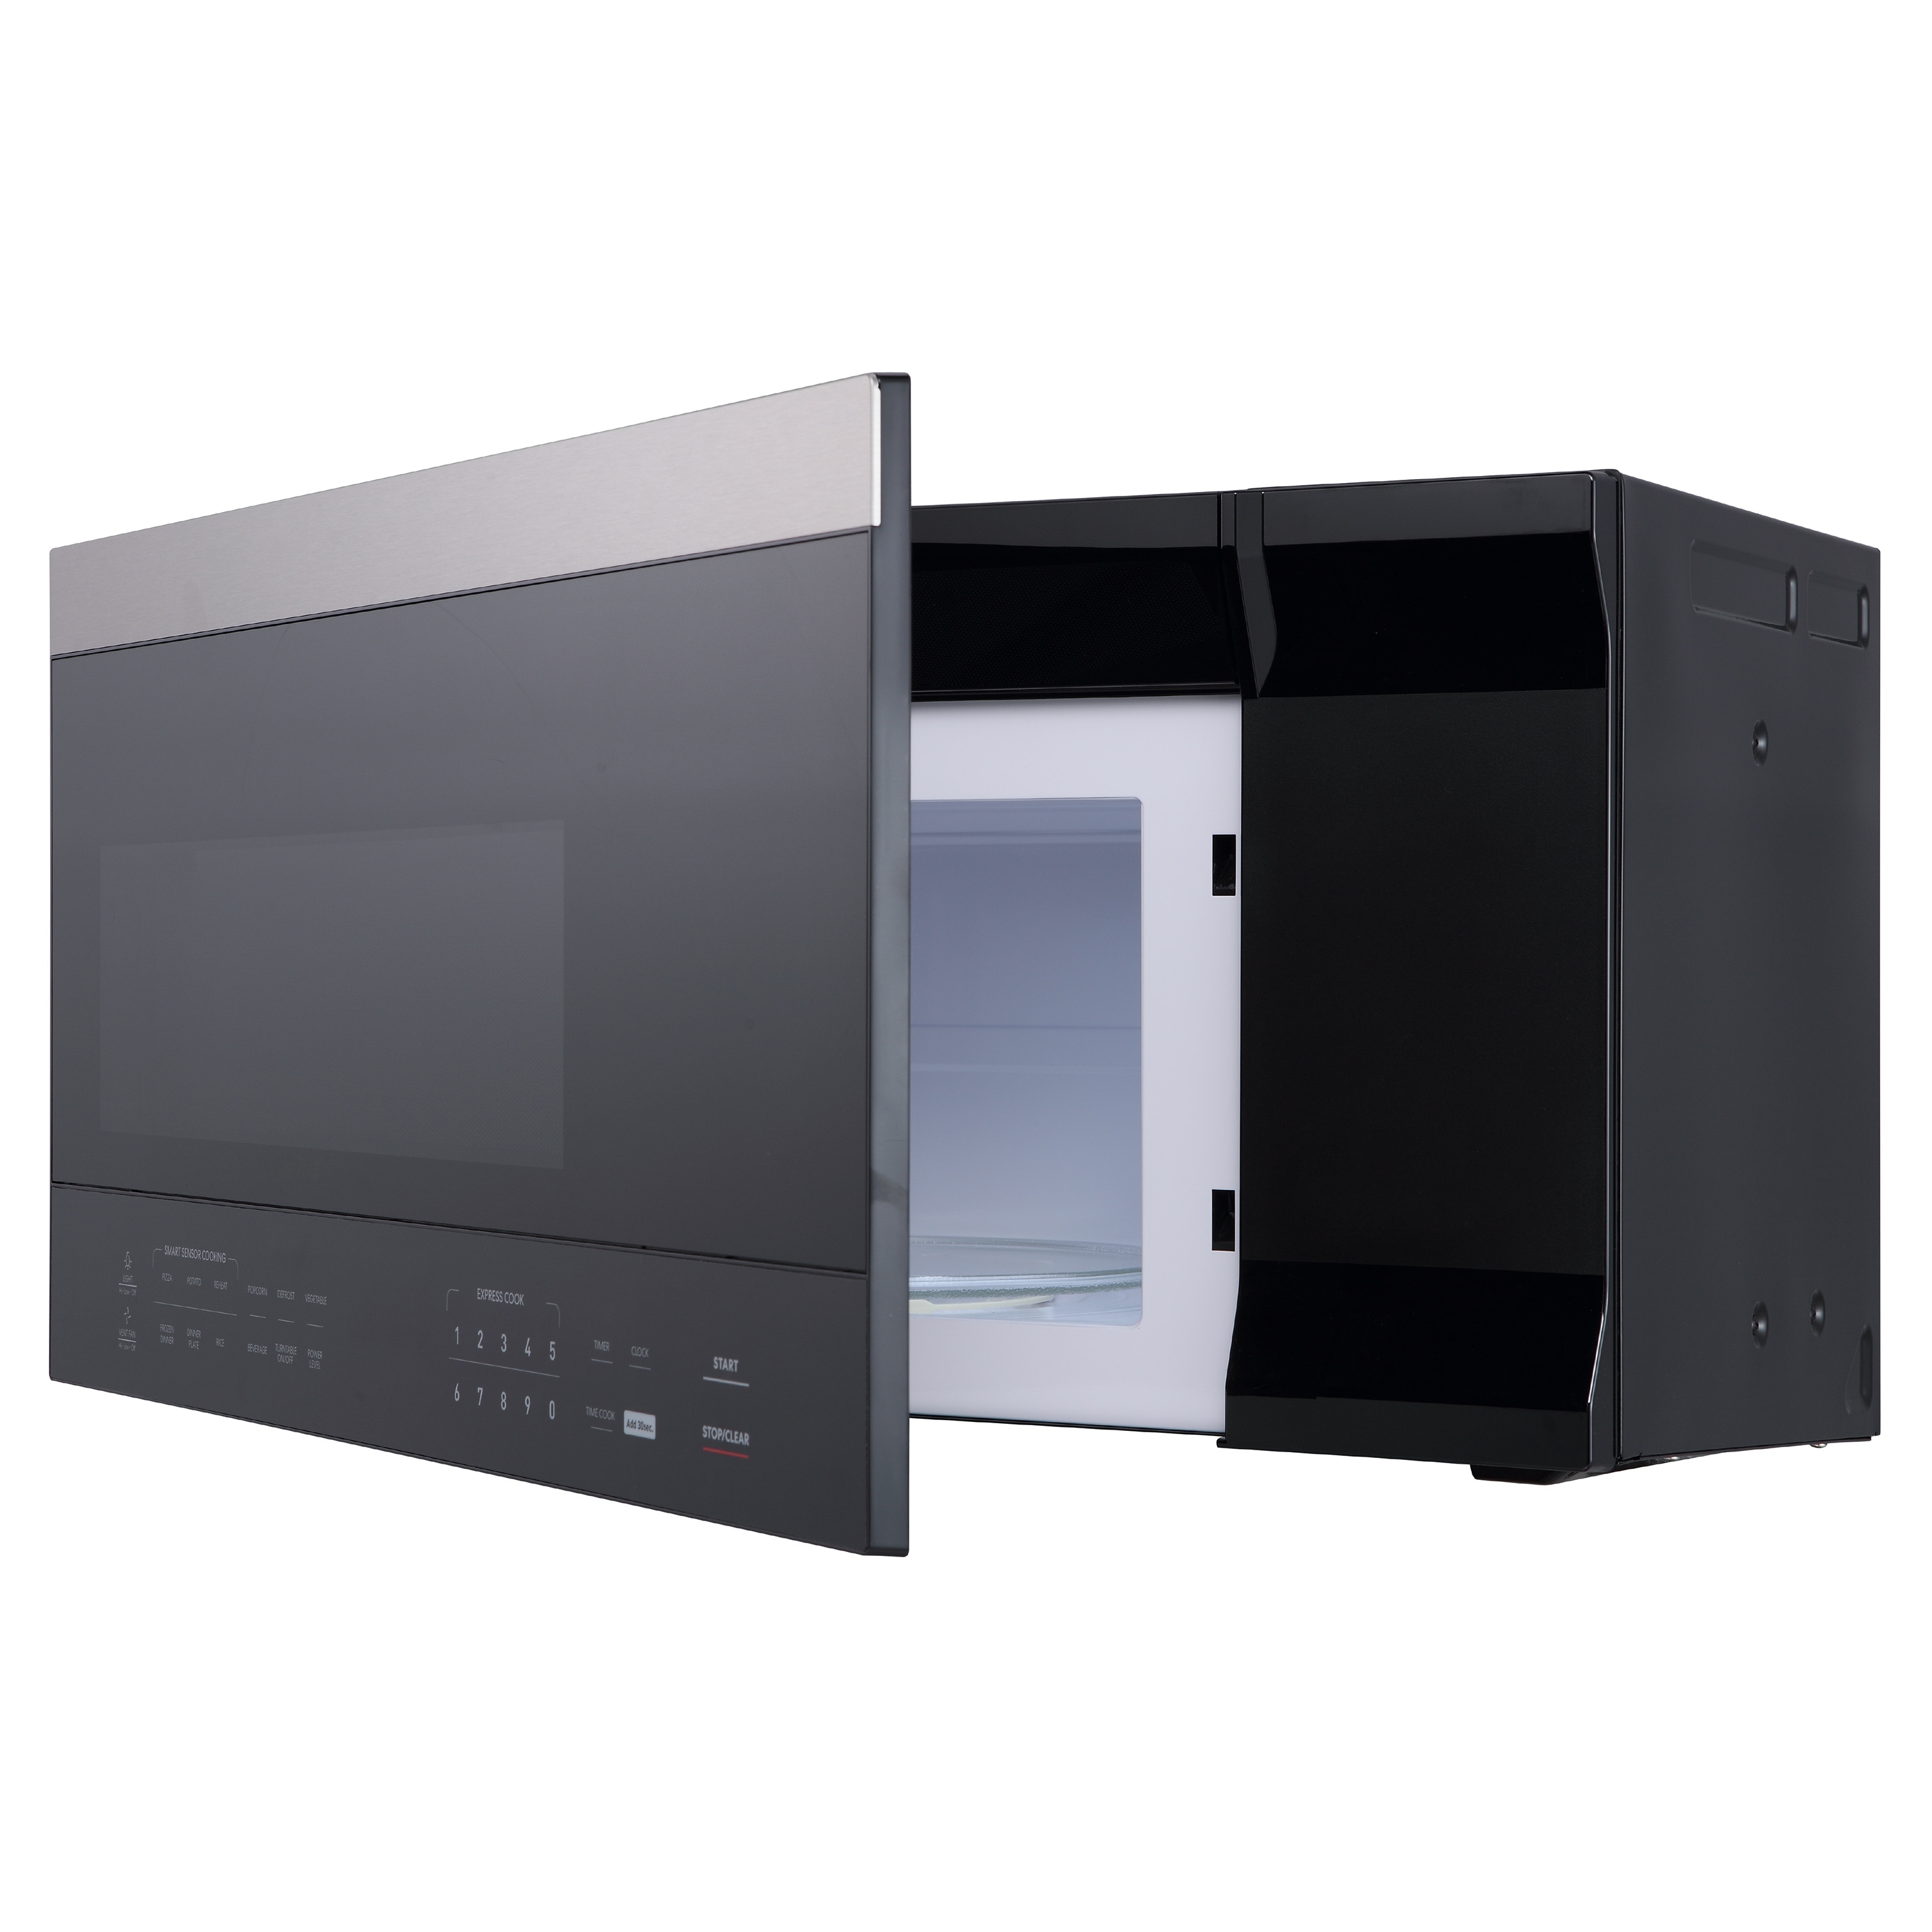 https://ak1.ostkcdn.com/images/products/is/images/direct/15aadc713ef53e21ec536c257e91434eef823cb9/Midea-Black-and-Decker-OTR-1.6-Microwave-Stainless-Steel.jpg